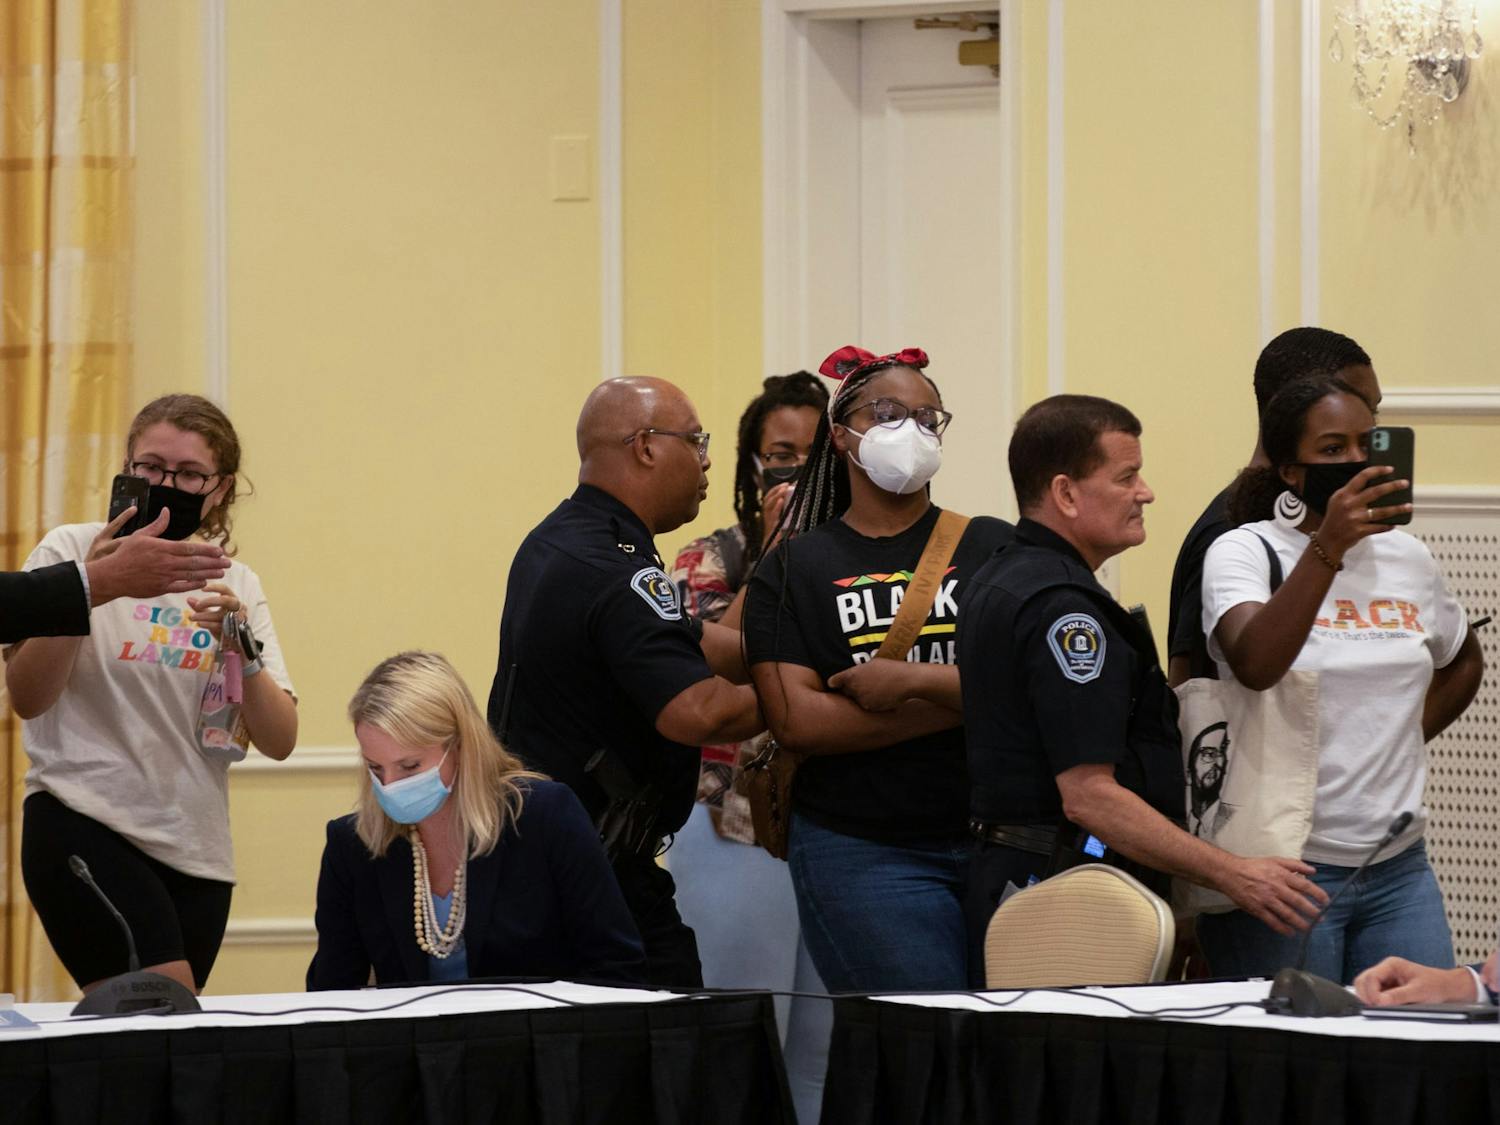 Demonstrators gather at the Board of Trustees' special meeting on June 30 as the Board goes into closed session to deliberate on Nikole Hannah-Jones' tenure case.